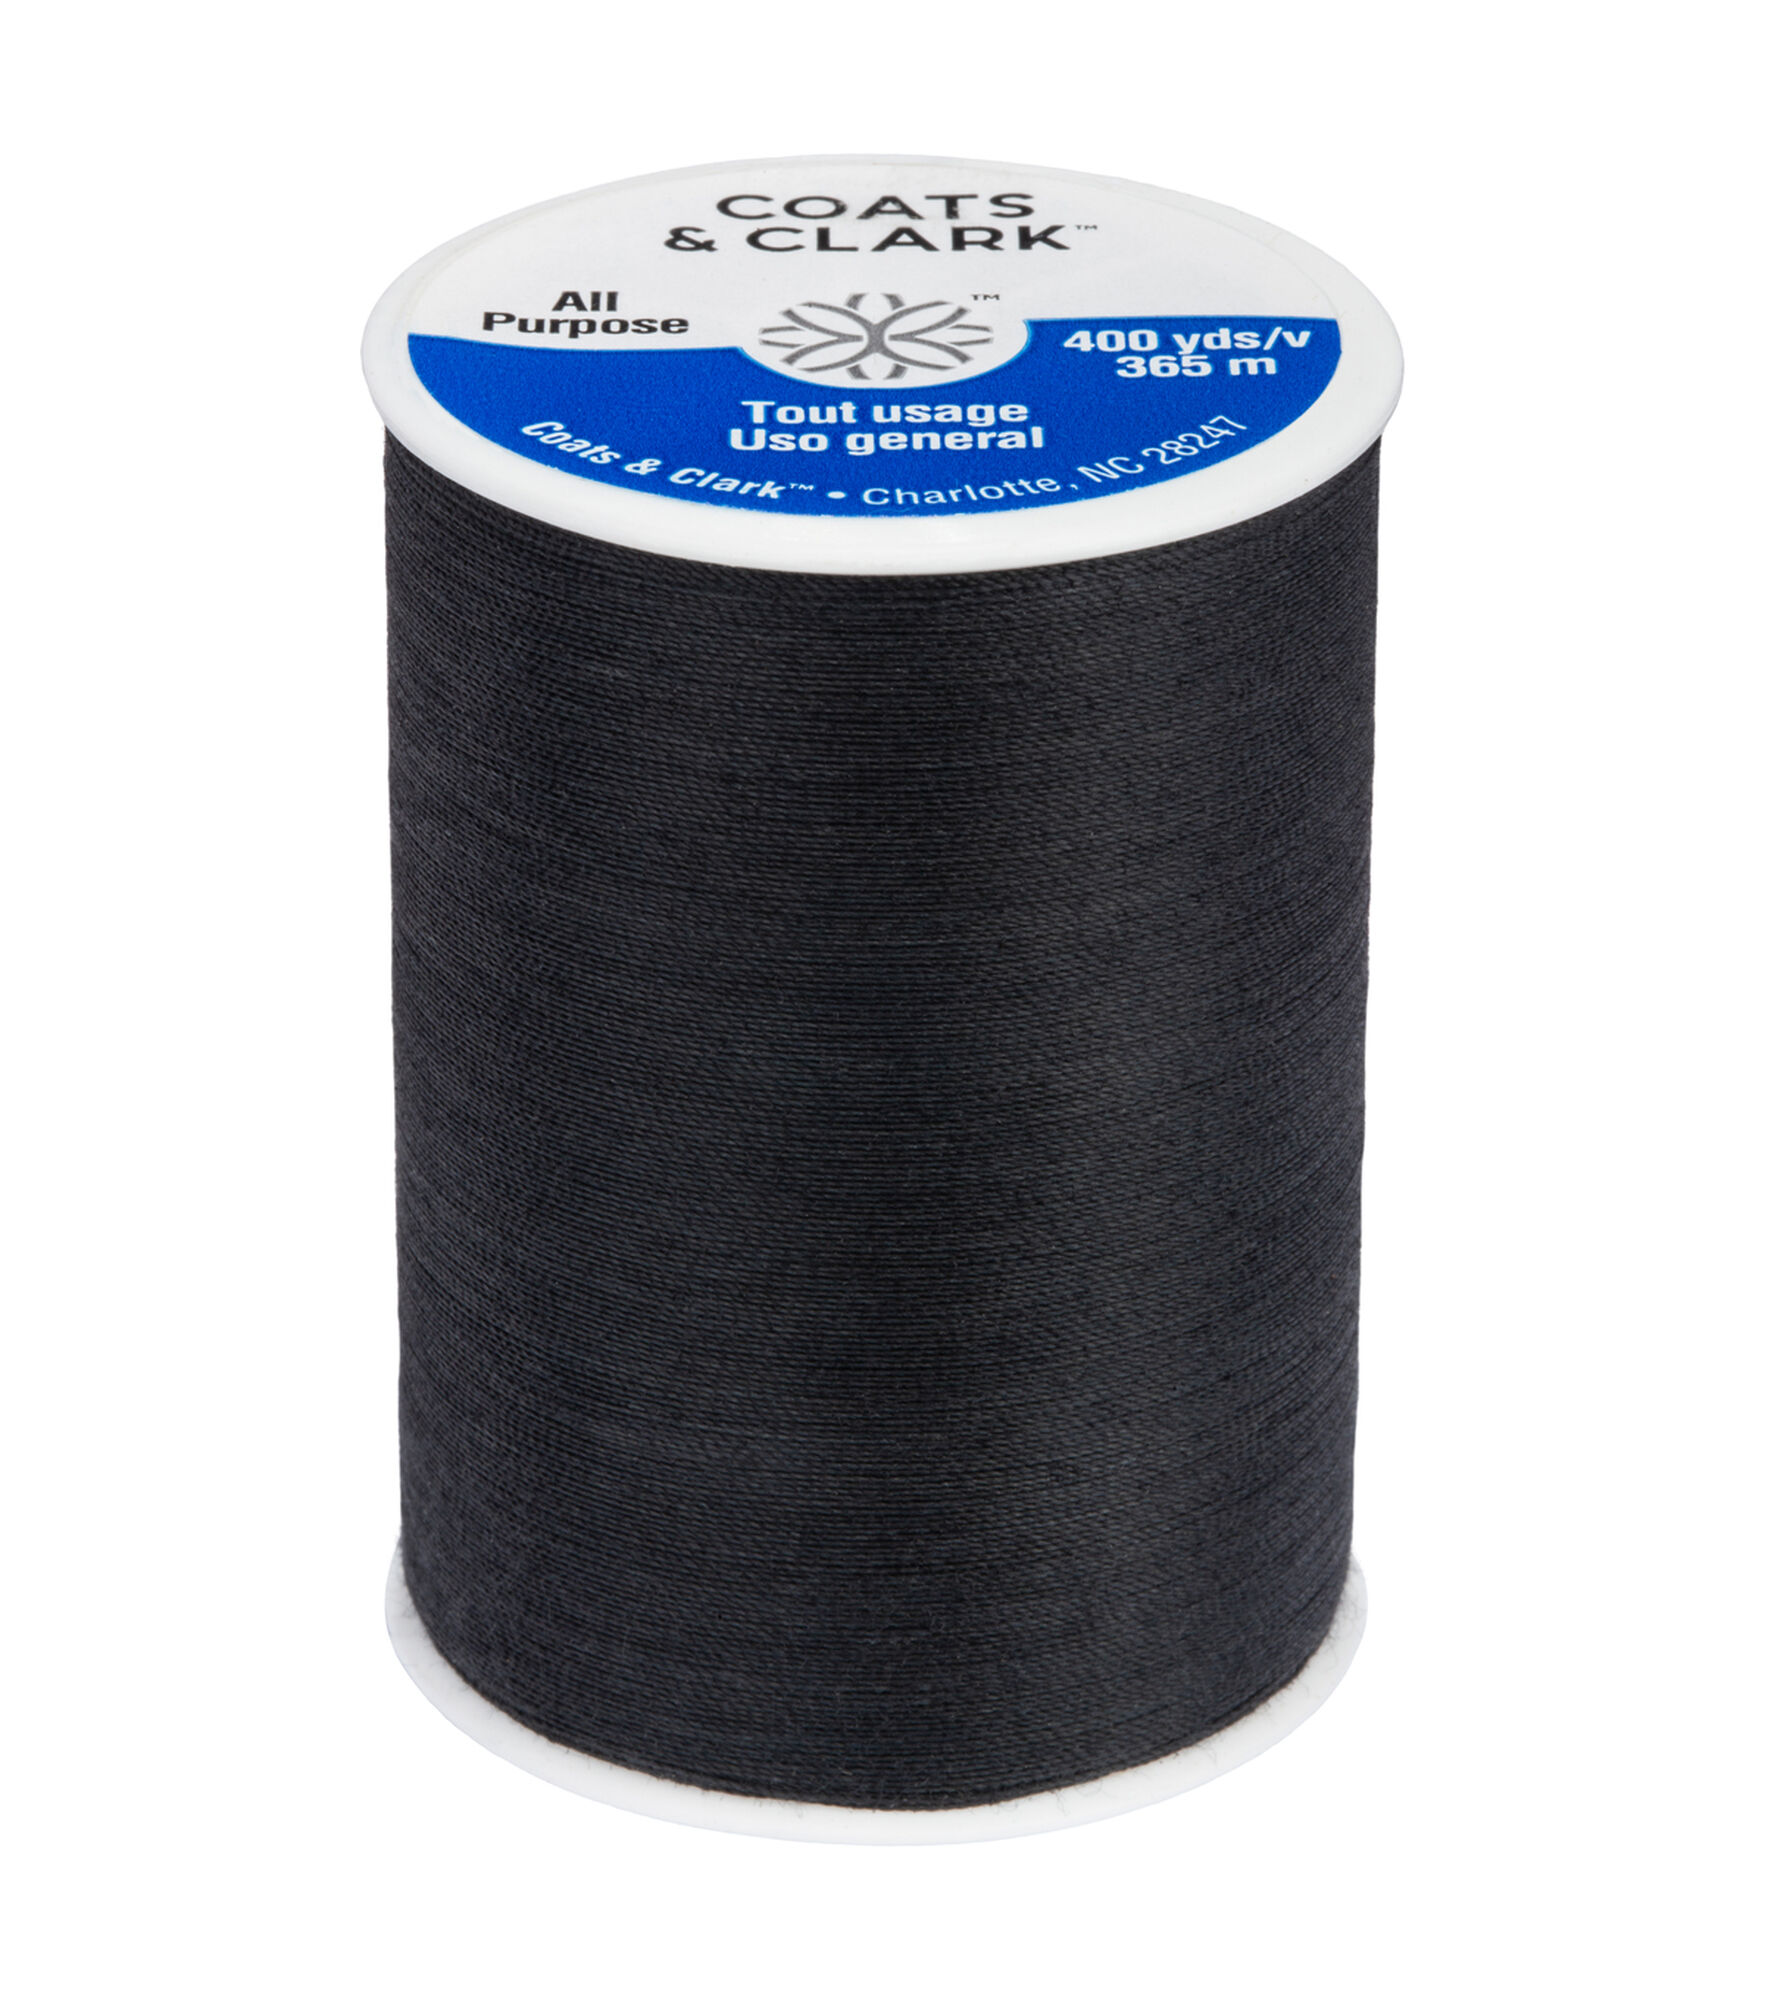 Heavy Duty Cotton Thread For Sewing Machine Quilting Accessories 3000 Yards